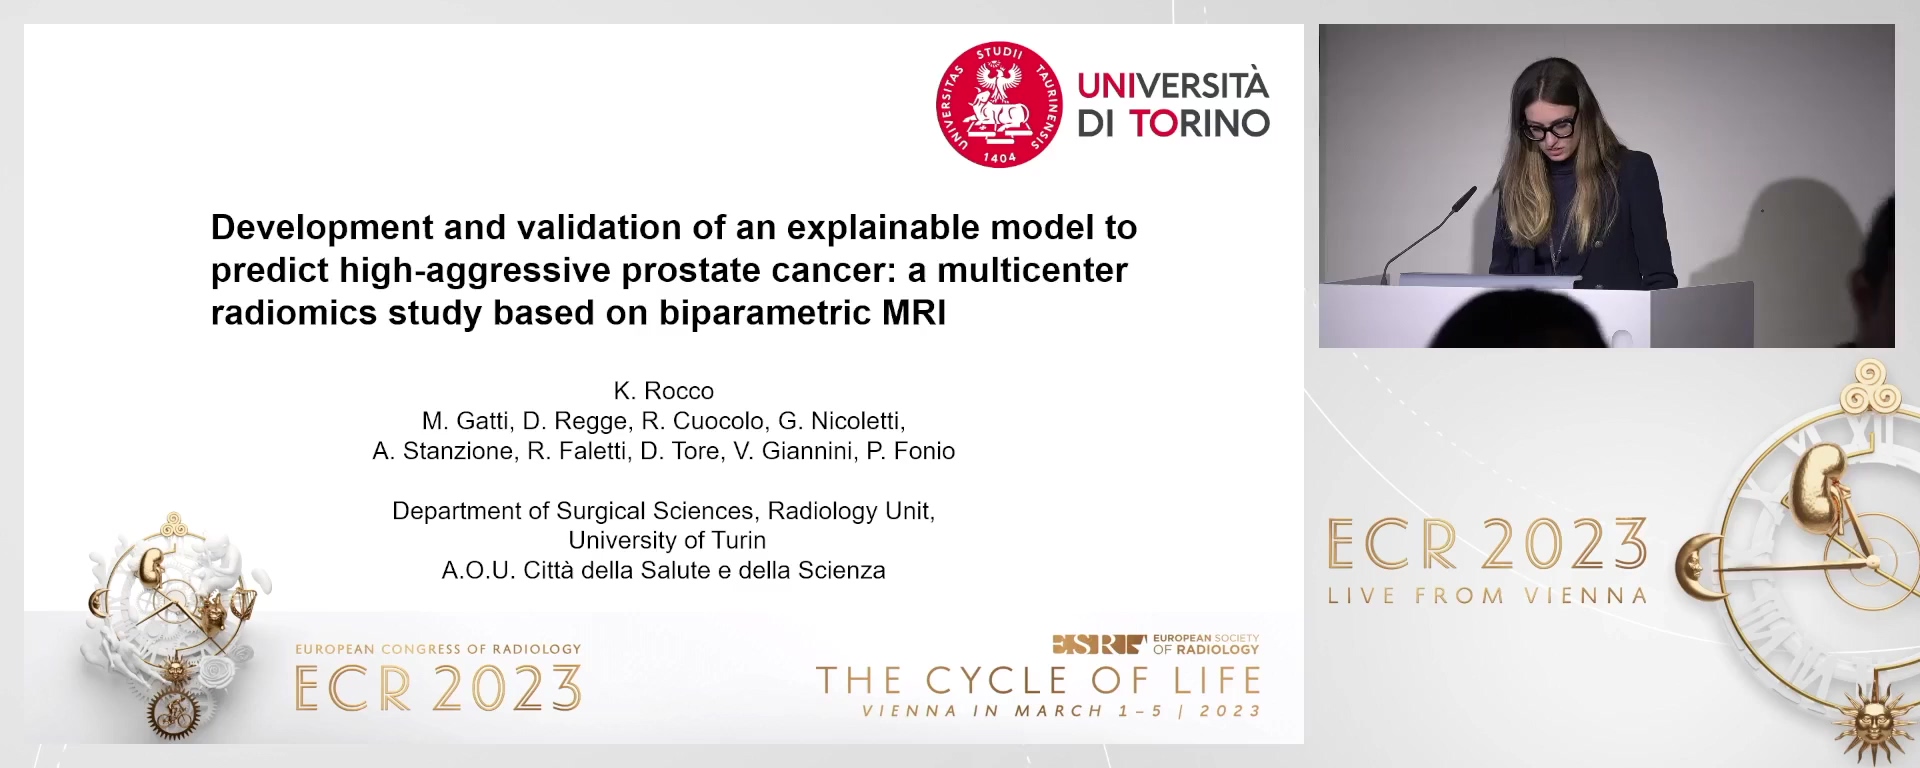 Development and validation of an explainable AI-CAD system to predict high-aggressive prostate cancer: a multicentre radiomics study based on biparametric MRI - Katia Rocco, Turin / IT